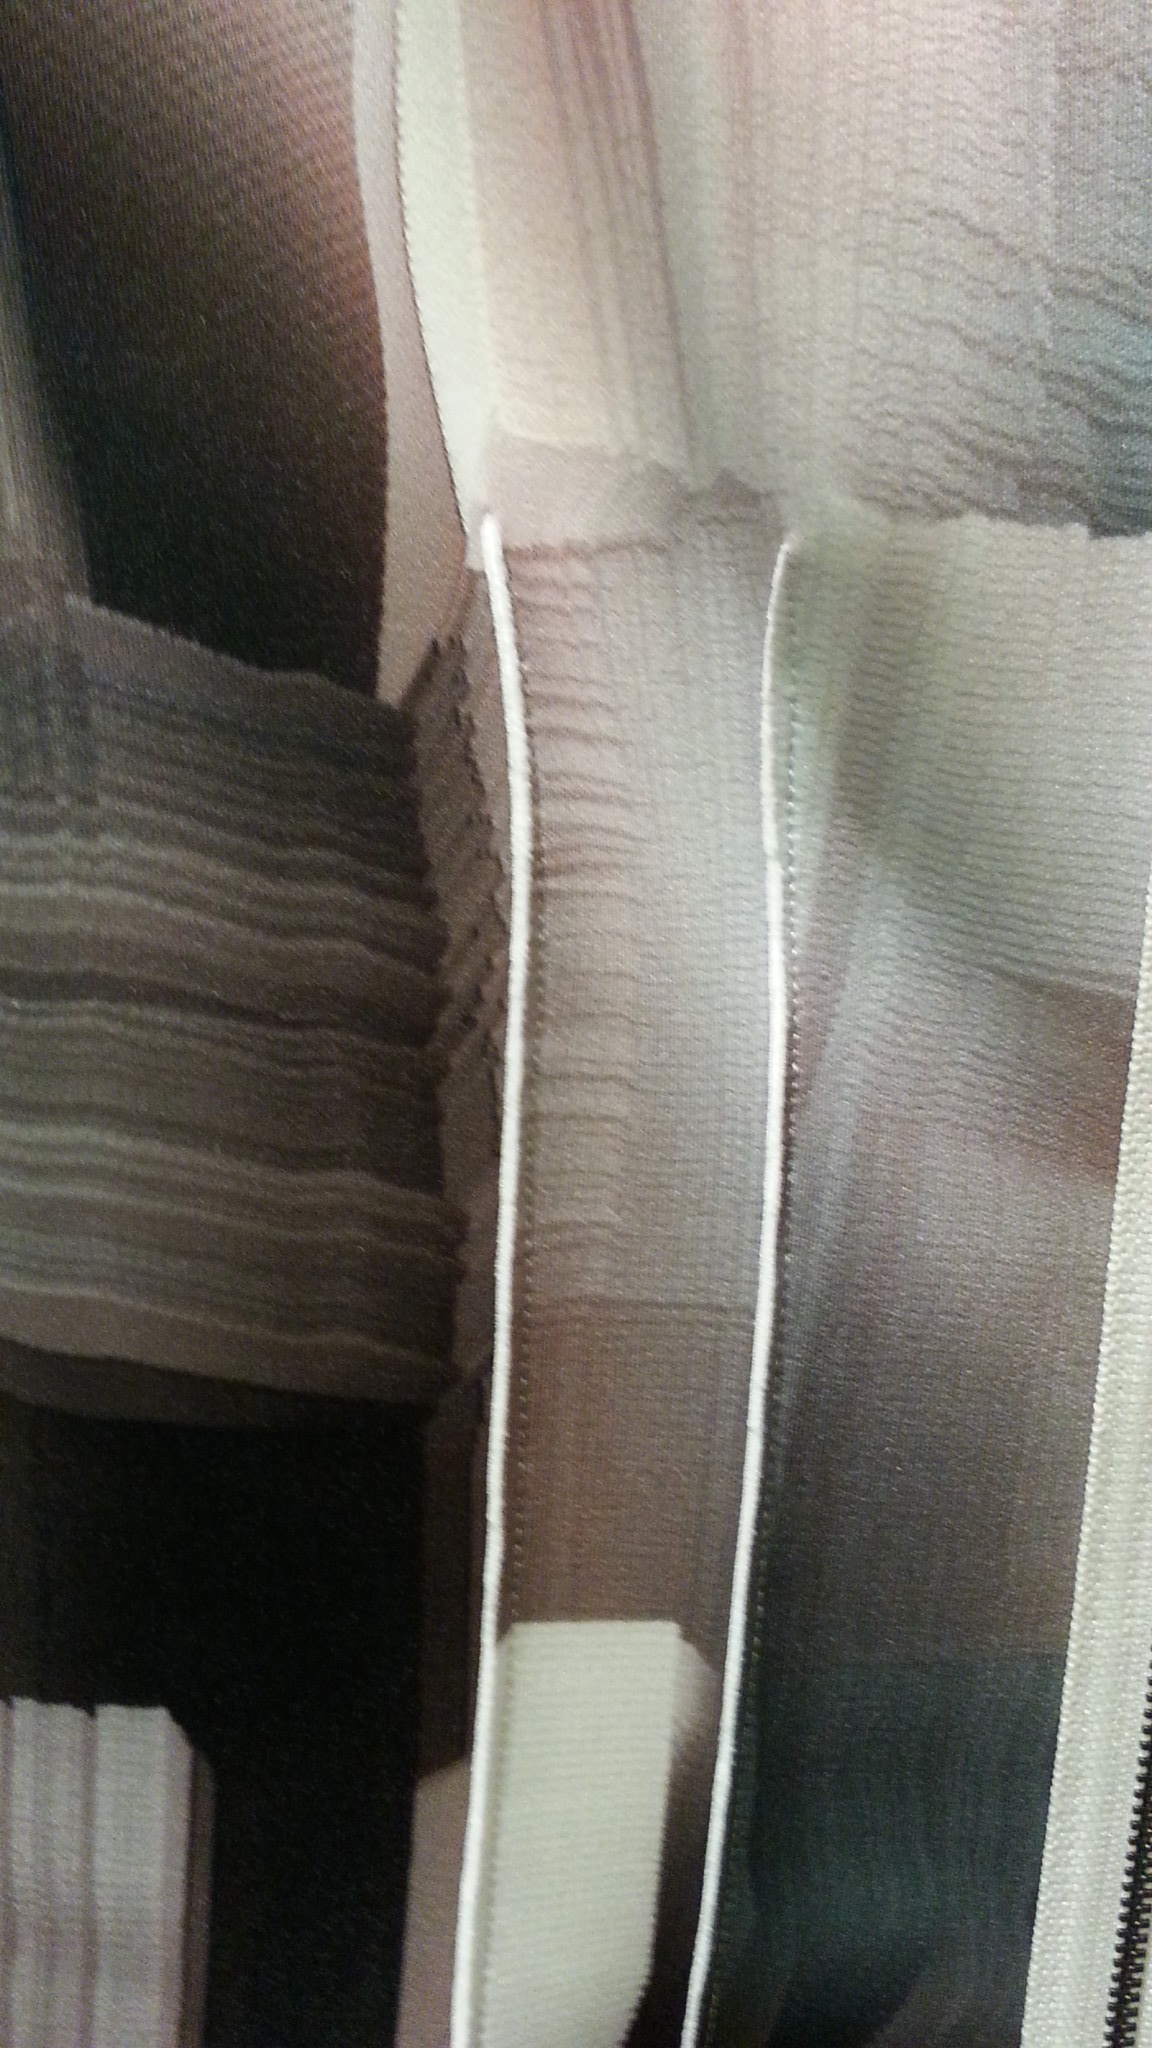 Close up of lapped seam dart on Tahari RTW; the white portion is the solid wrong side of fabric